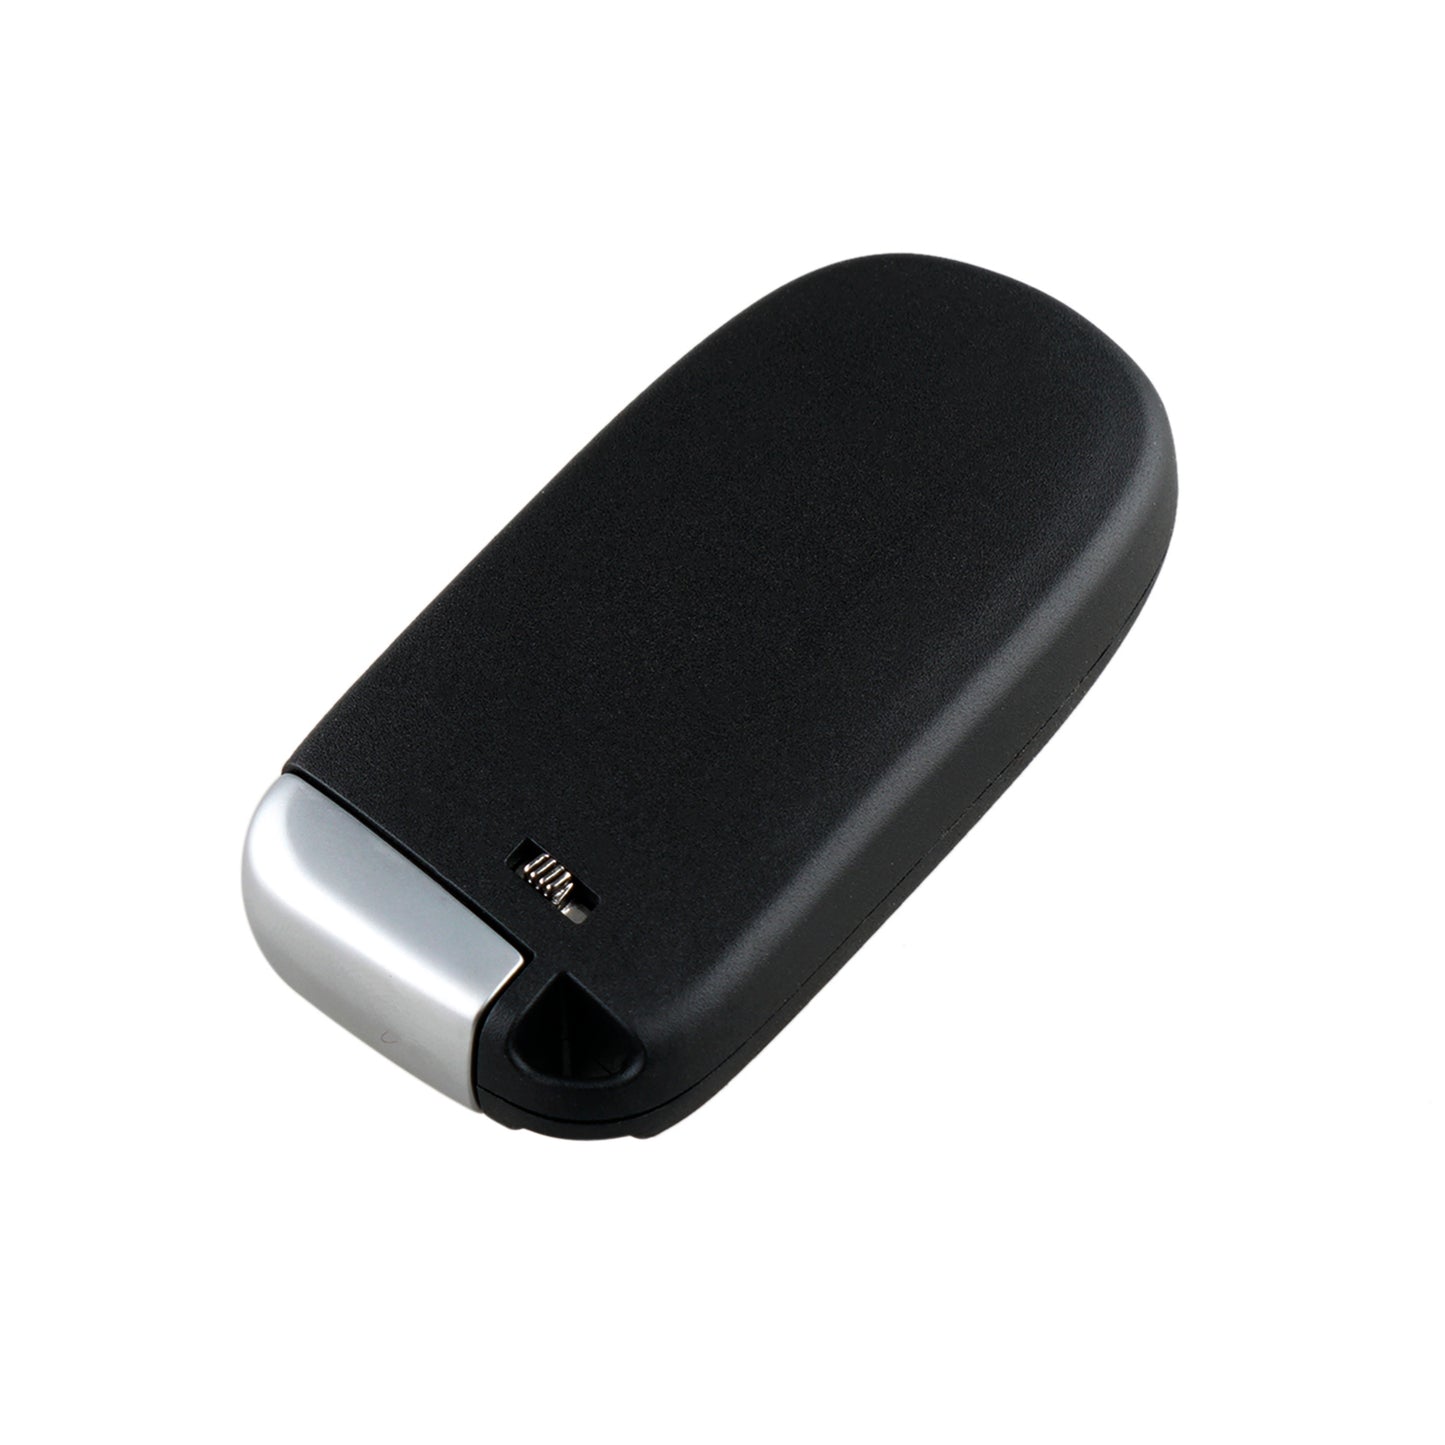 3 Buttons 433MHz Keyless Entry Fob Remote Car Key For 2014 - 2021 Jeep Cherokee FCC ID:GQ4-54T SKU : J90